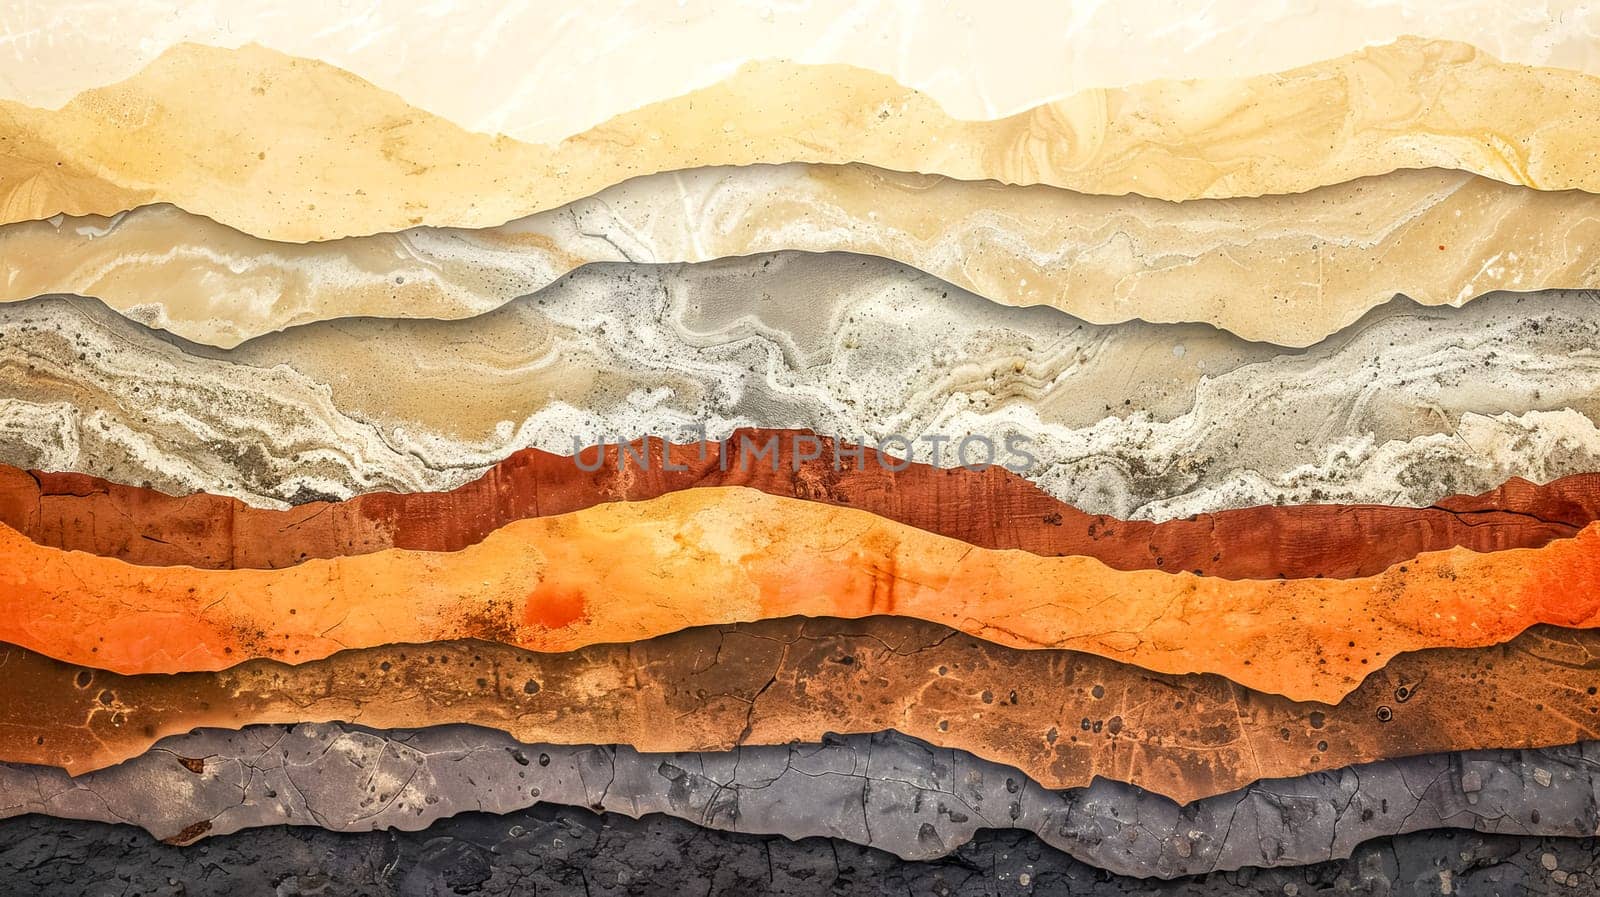 Abstract, multilayered artwork with a rich palette of earth tones